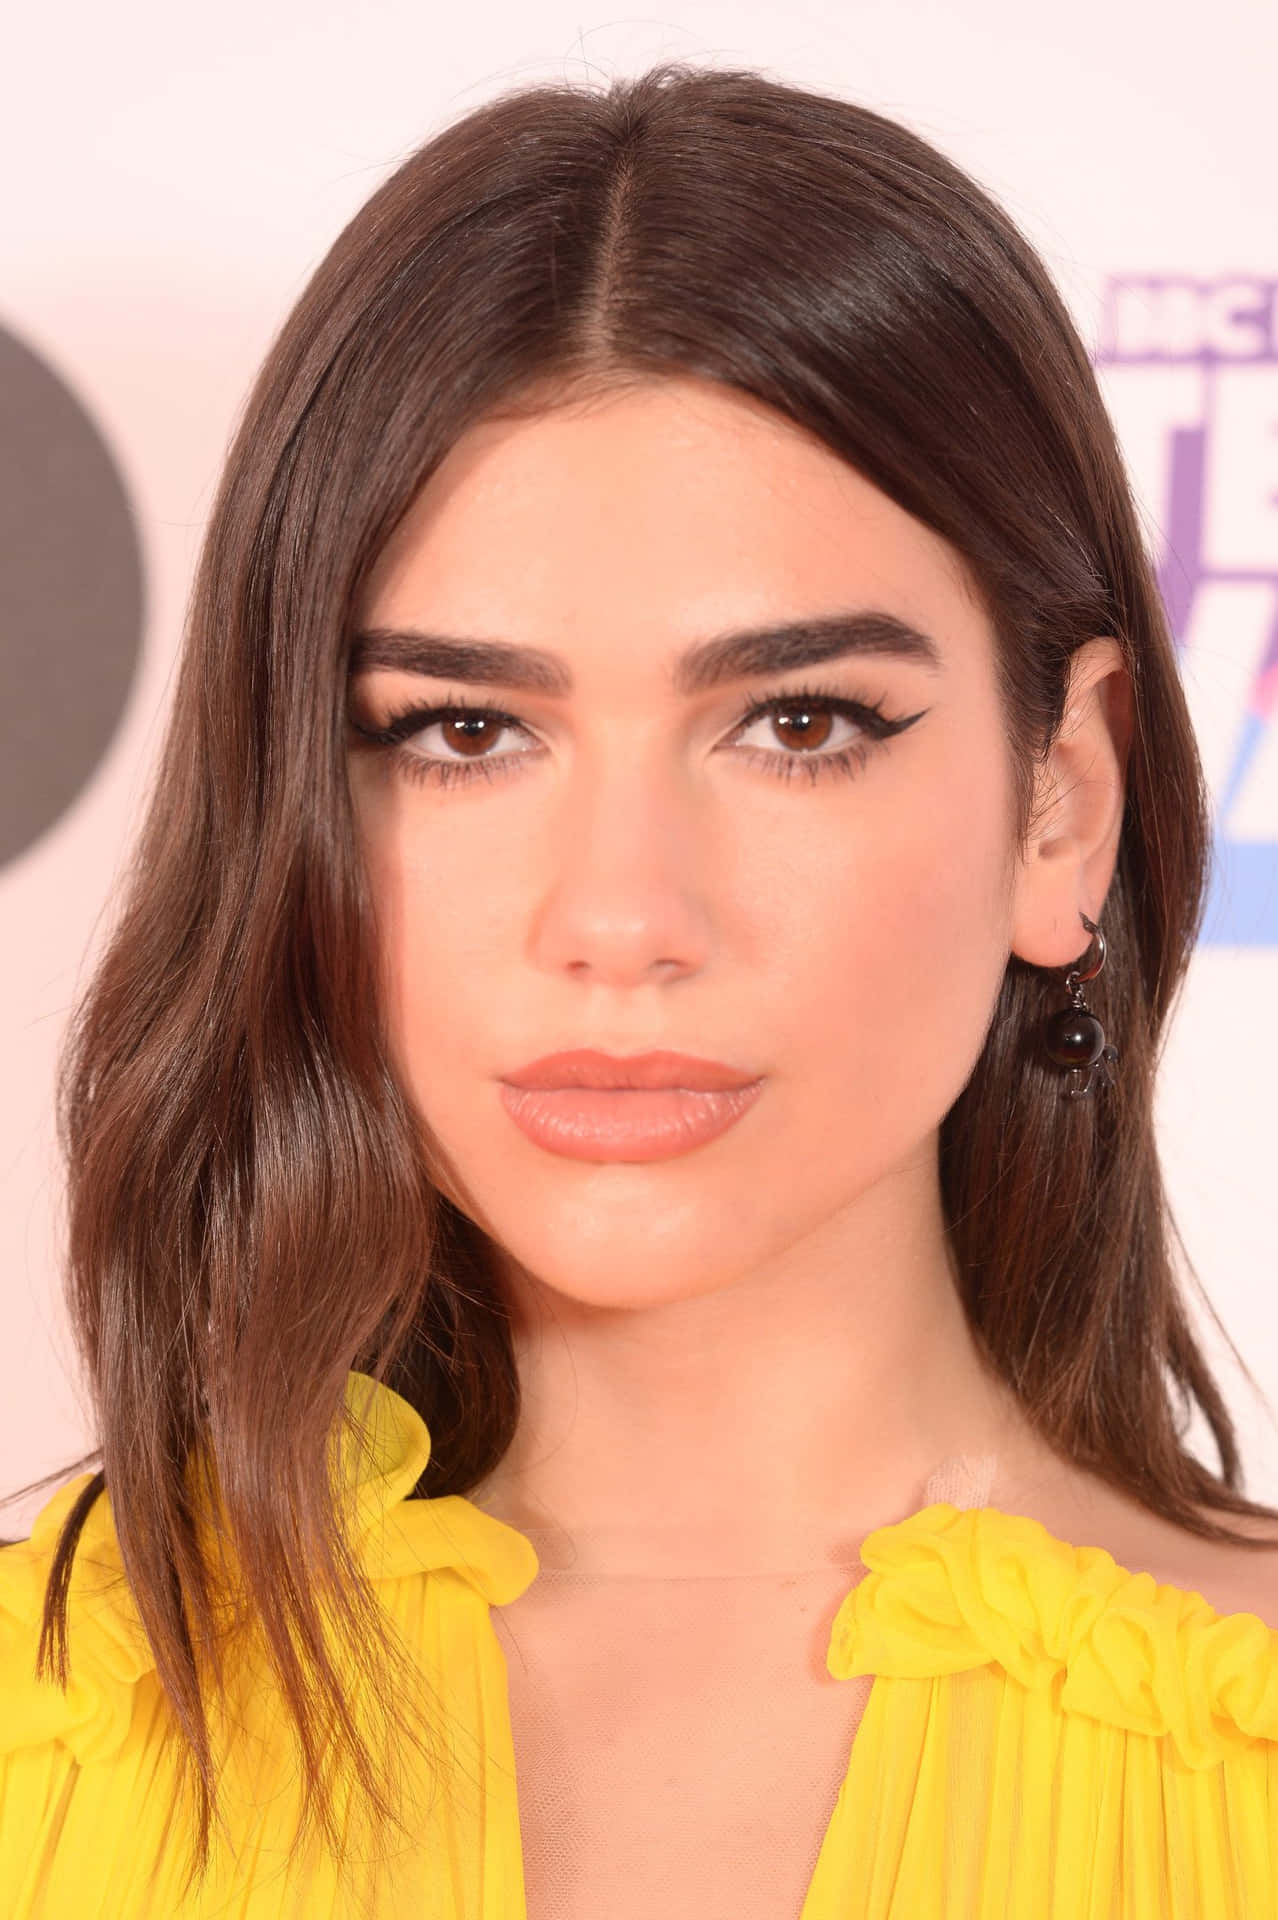 Dua Lipa radiates with style wearing her signature colorful makeup